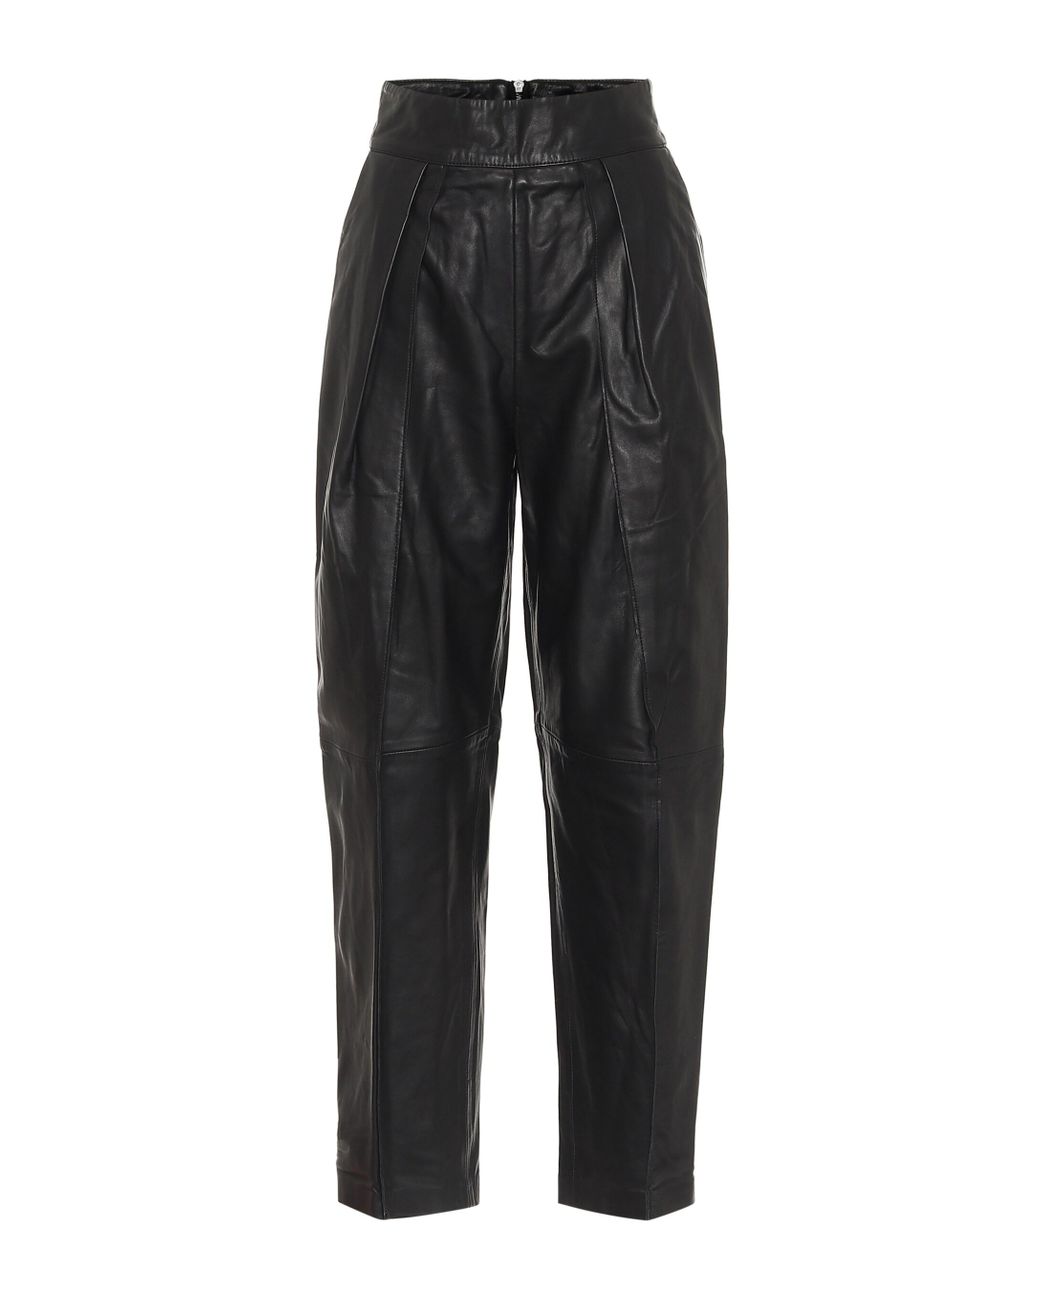 Maticevski High-rise Straight Leather Pants in Black - Lyst